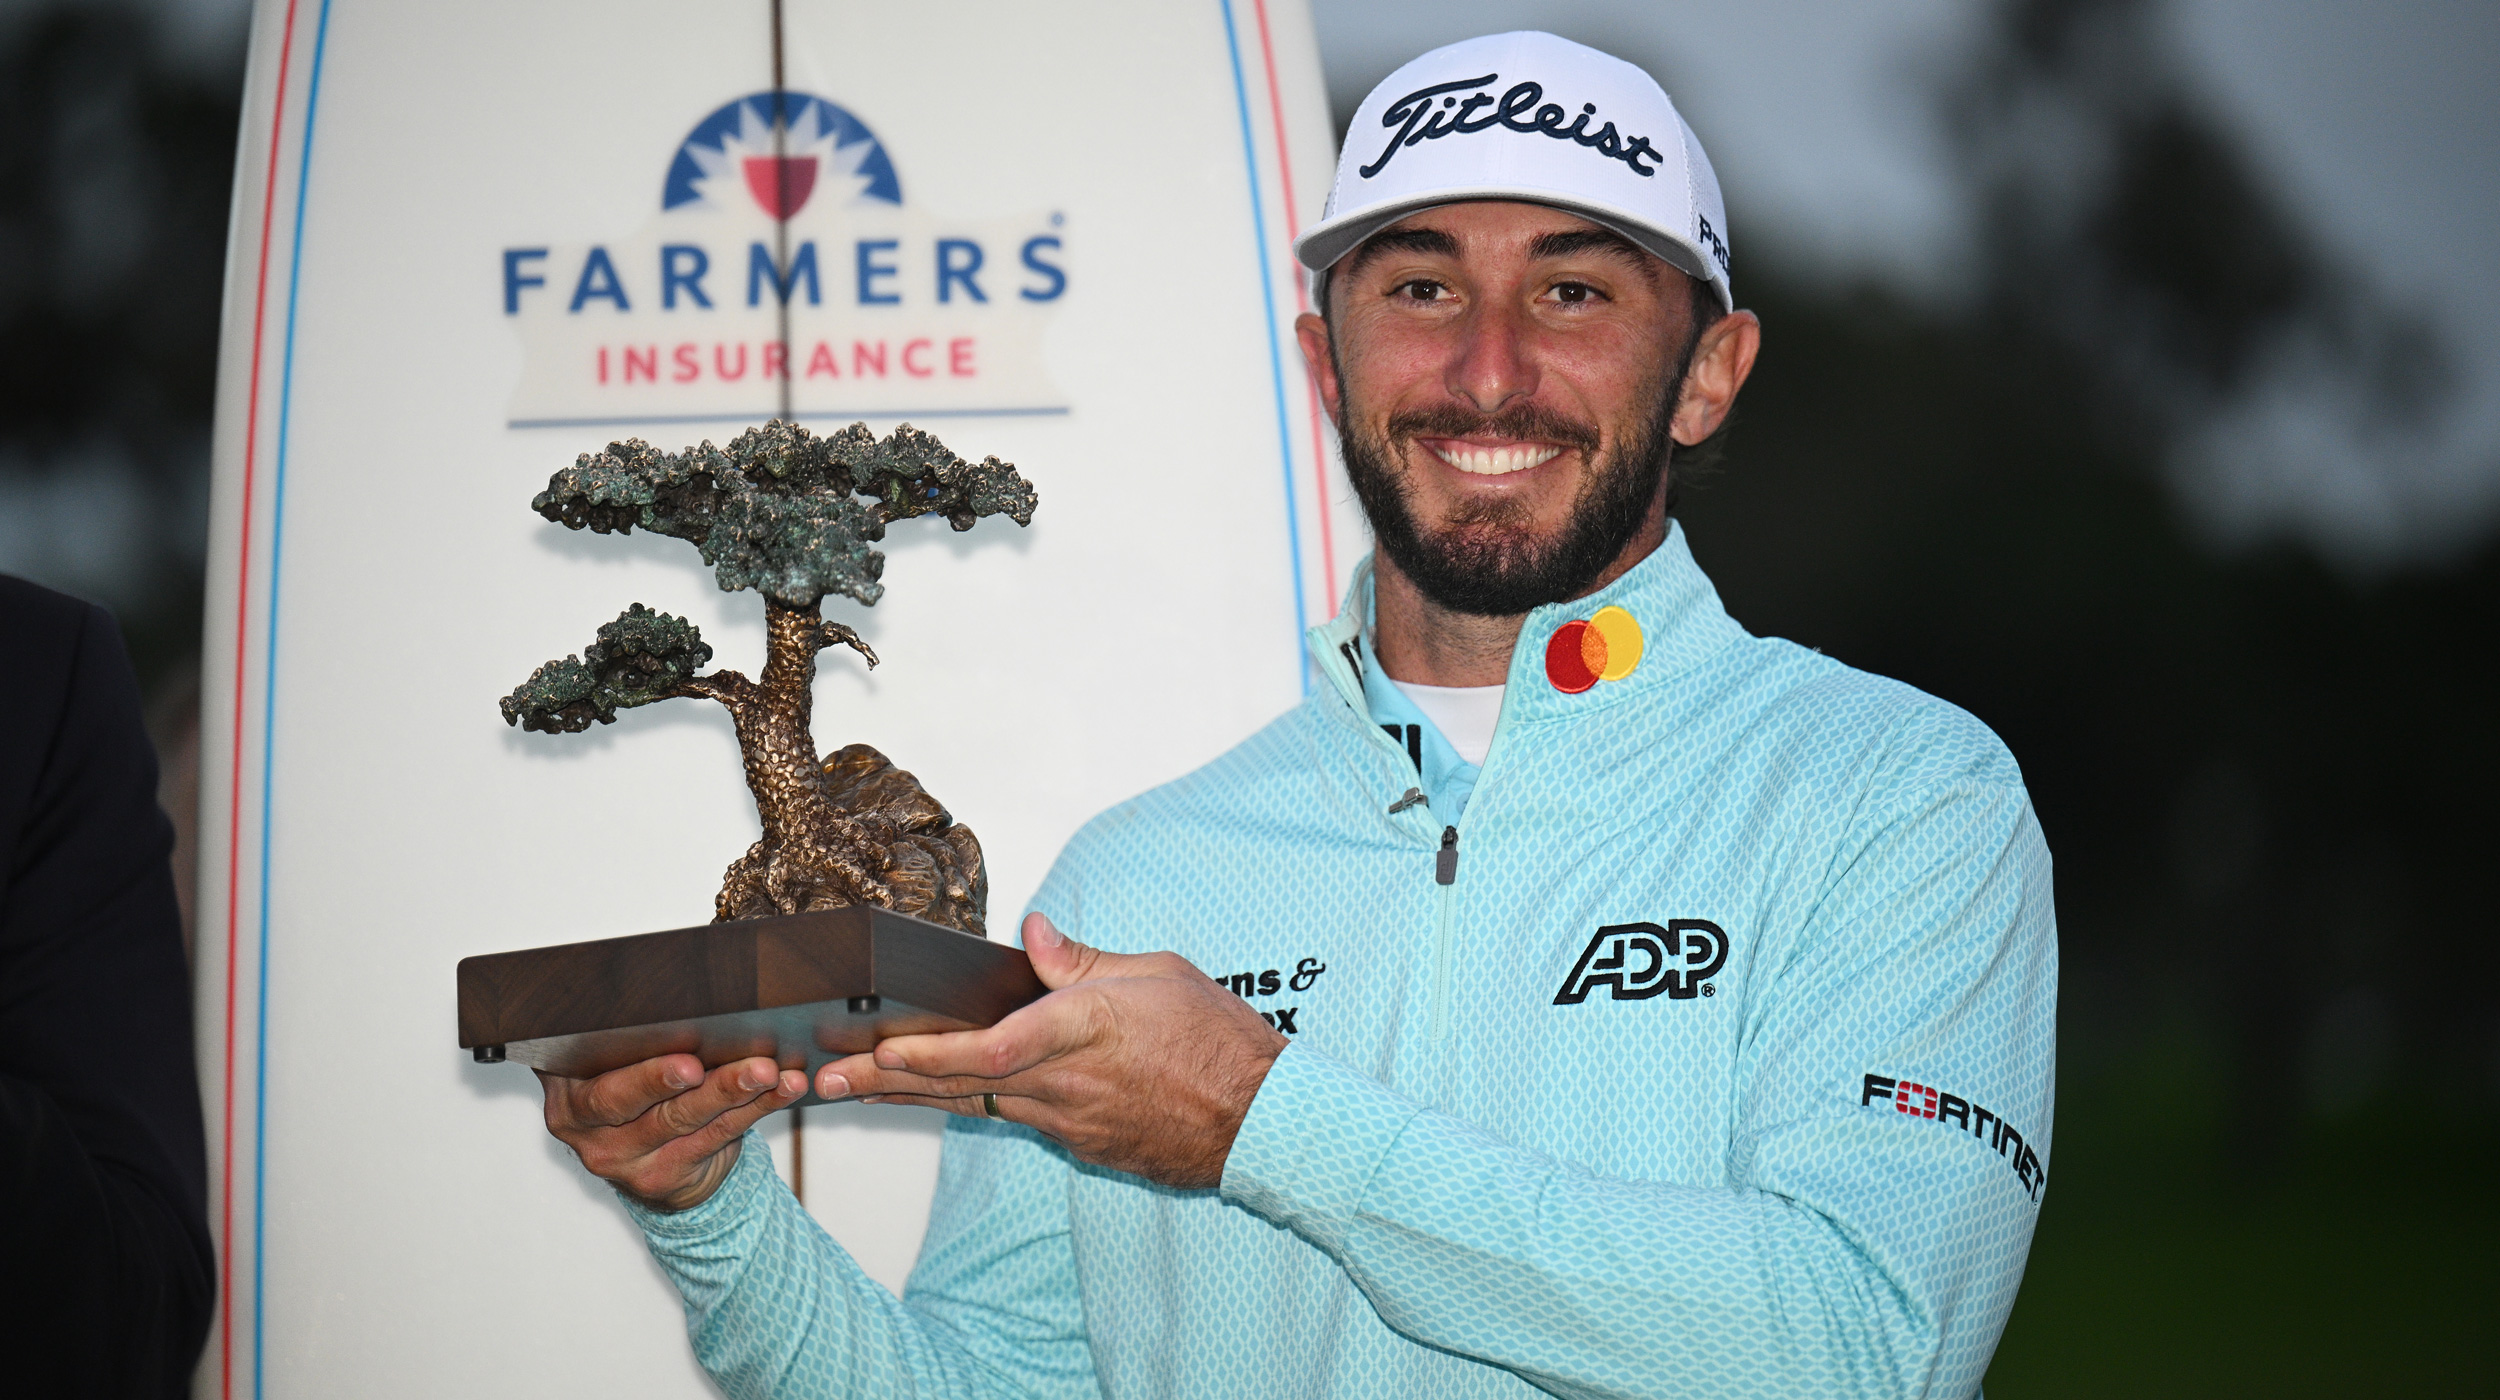 Max Homa: Biography, Career, Net Worth, Family, Top Stories for the PGA  Tour Standout